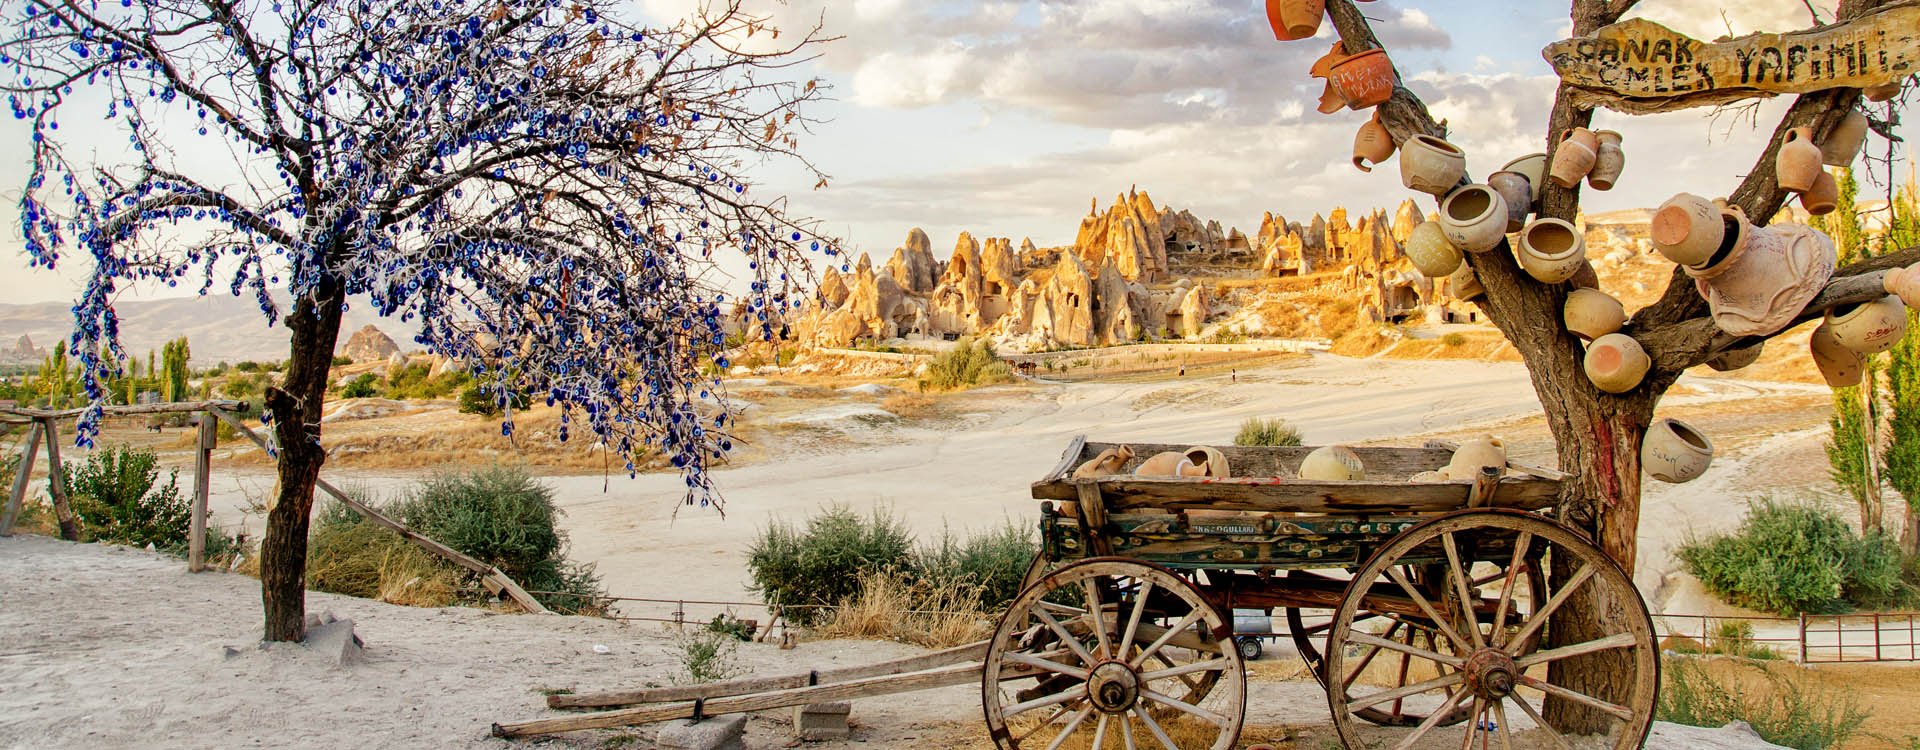 Tree Of Wishes with clay pots in Cappadocia.